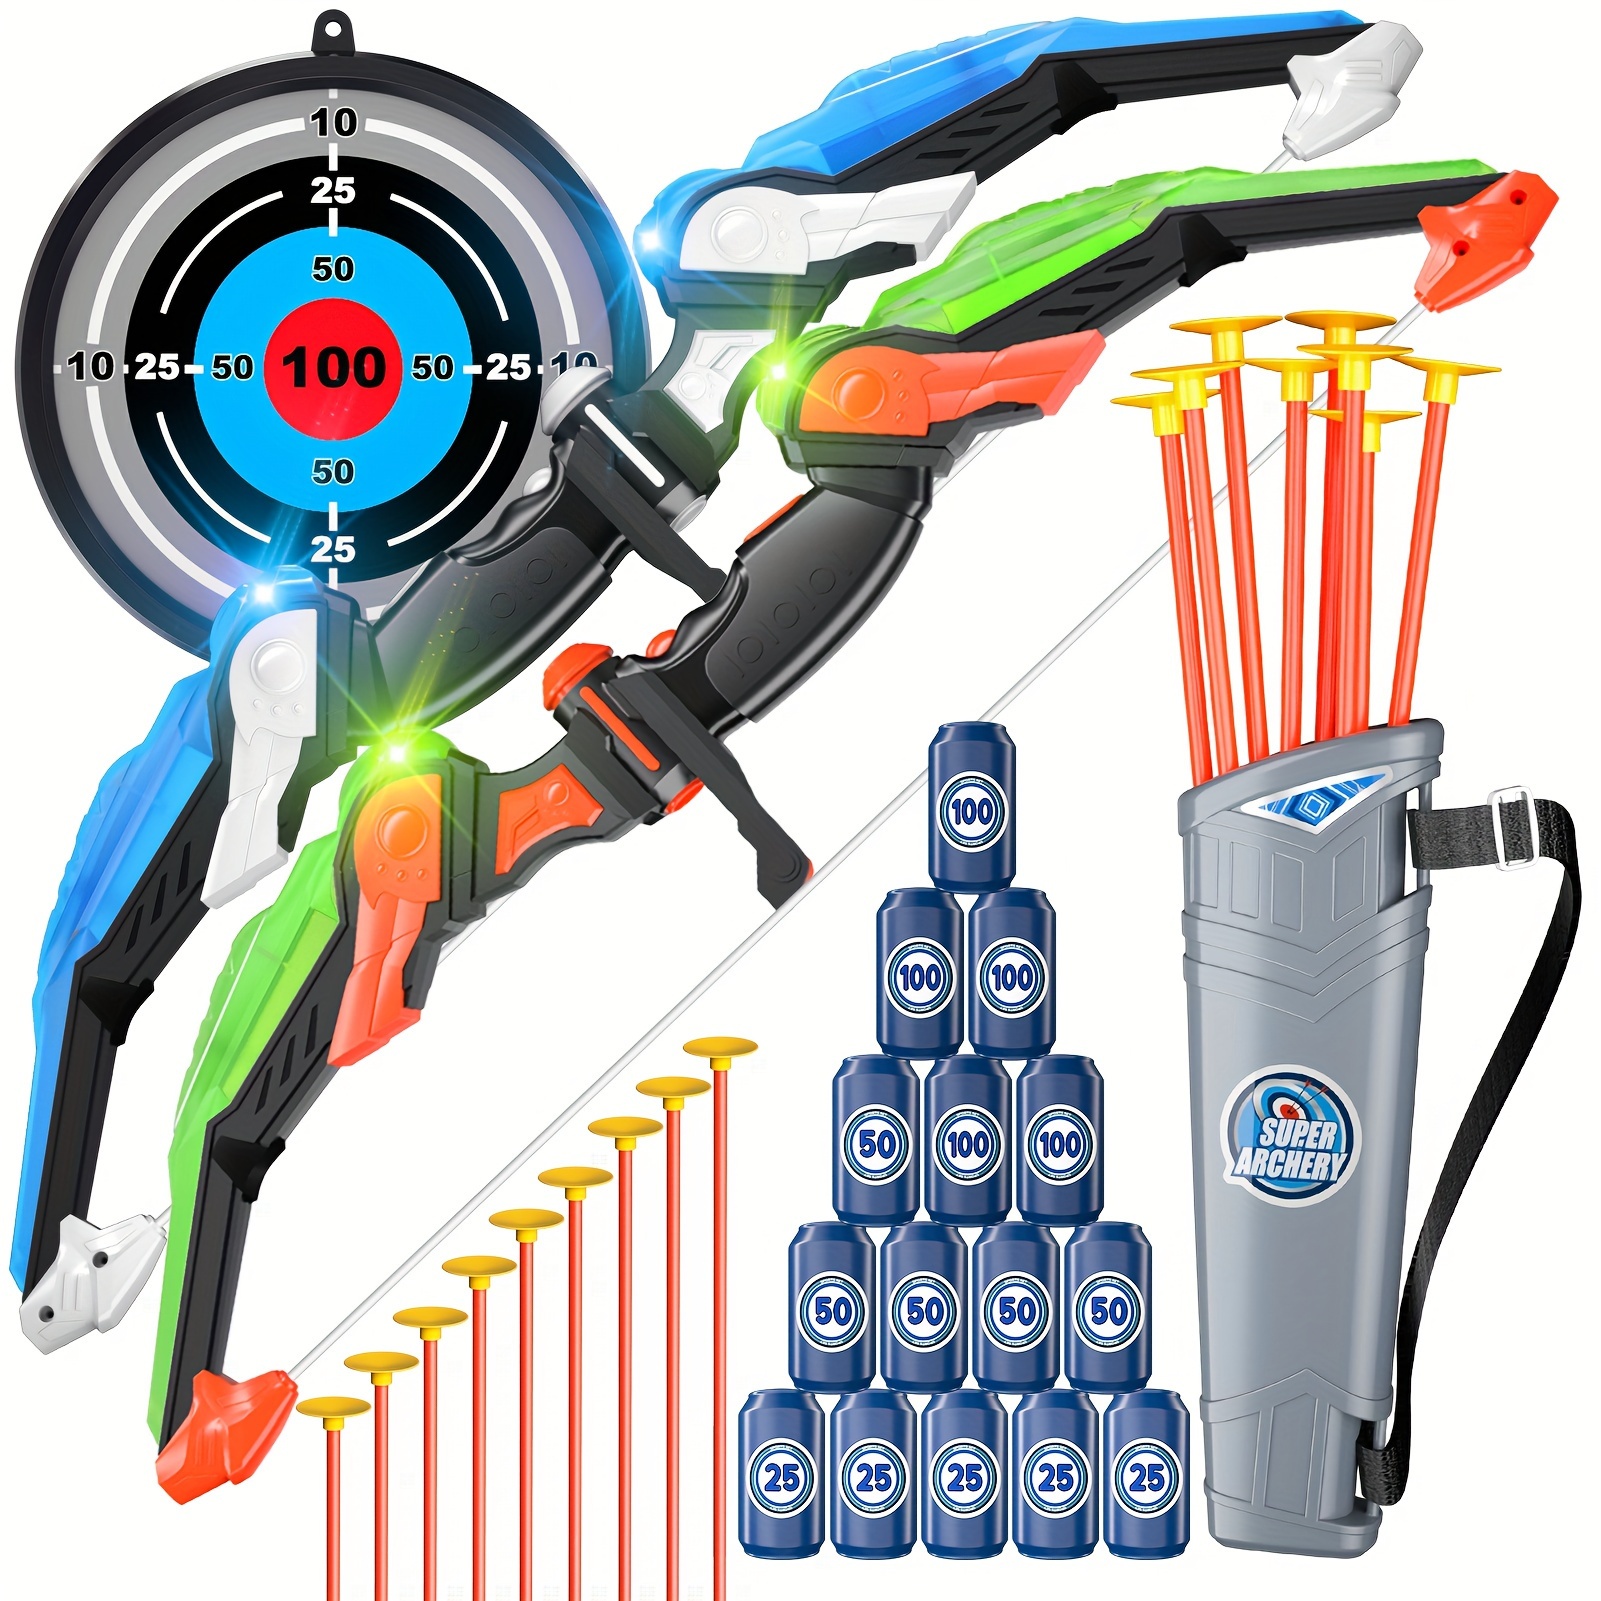 

Bow And Arrow For Kids 4-8 6-8 8-12, Kids Toys With Light-up Led Includes 32 Suction Cup Arrows, Indoor Outdoor Bow And Arrow Toys Gifts Christmas Gift